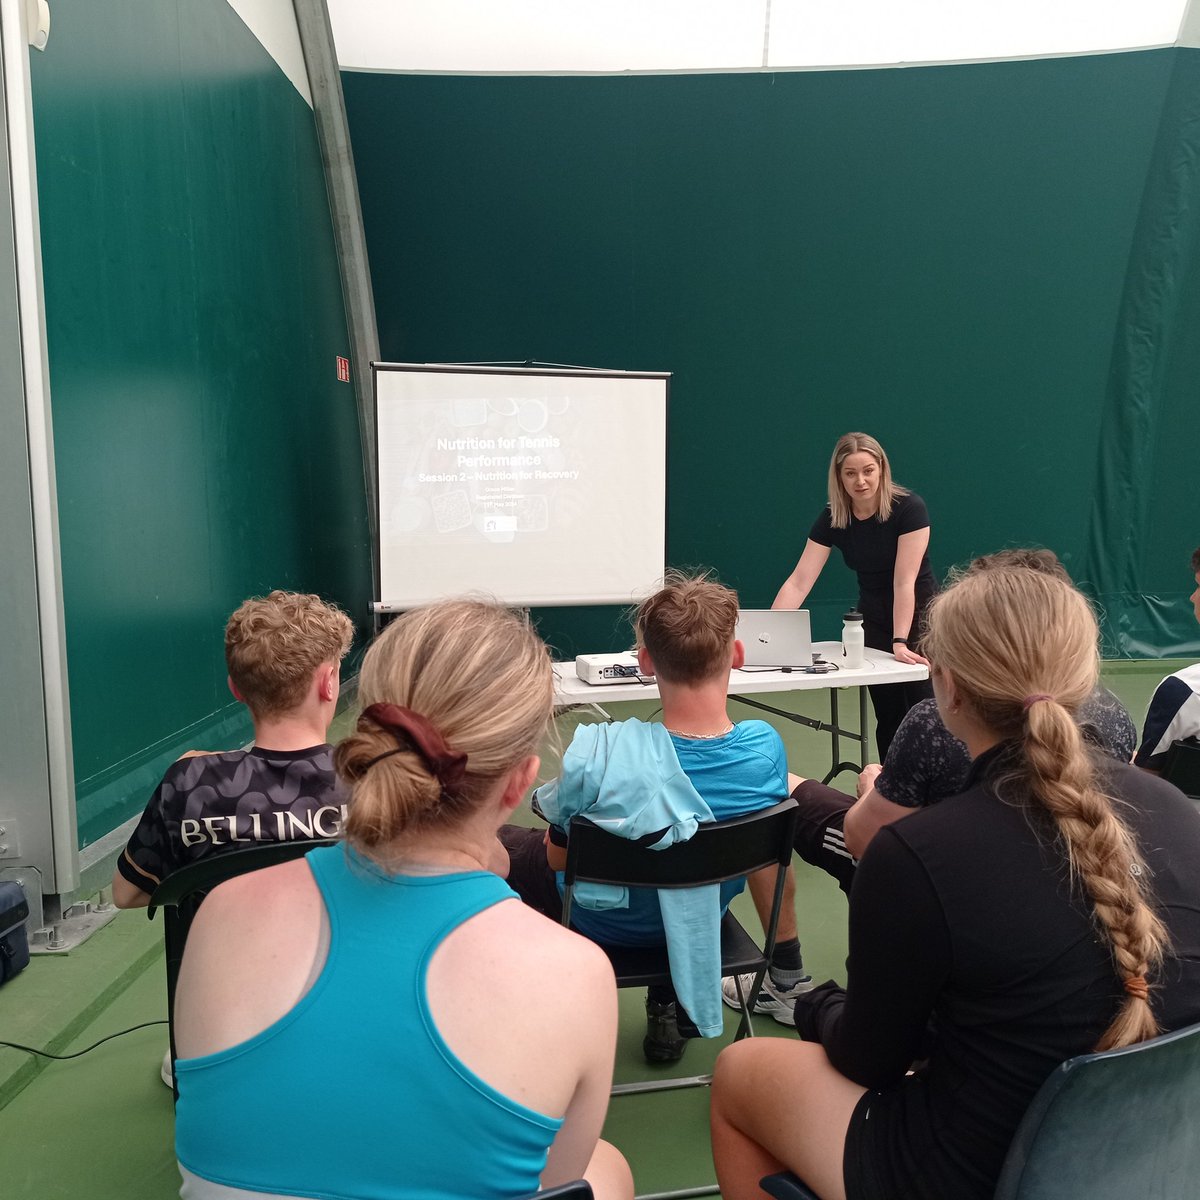 On Saturday players in the National Performance Development Programme had their second session with nutritionist Grace Miller, this time focusing on nutrition for recovery which is key for players🎾 Big thanks to Grace for another informative session with some top tips! #Tennis